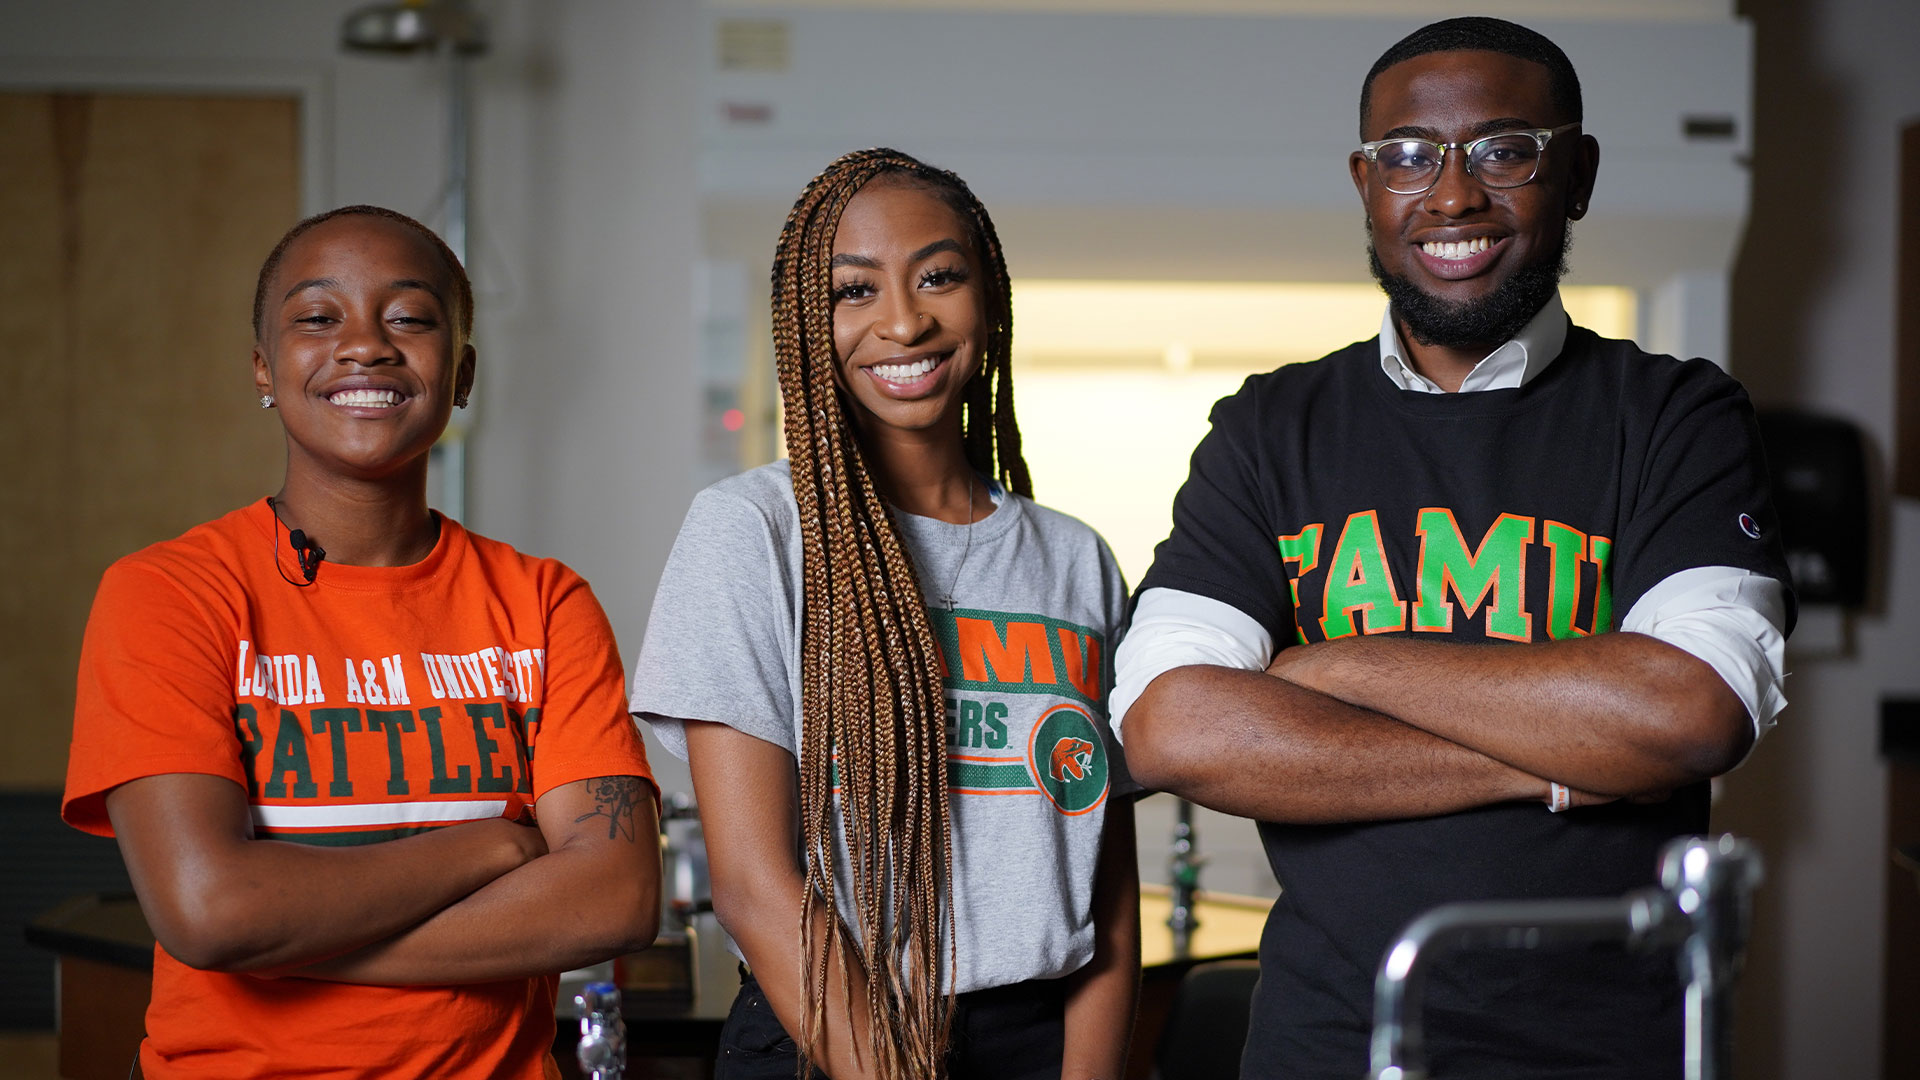 The Engineering Living Learning Community is for FAMU students pursuing careers in Biomedical, Chemical, Civil, Computer, Electrical, Environmental, Industrial, and Mechanical Engineering.   